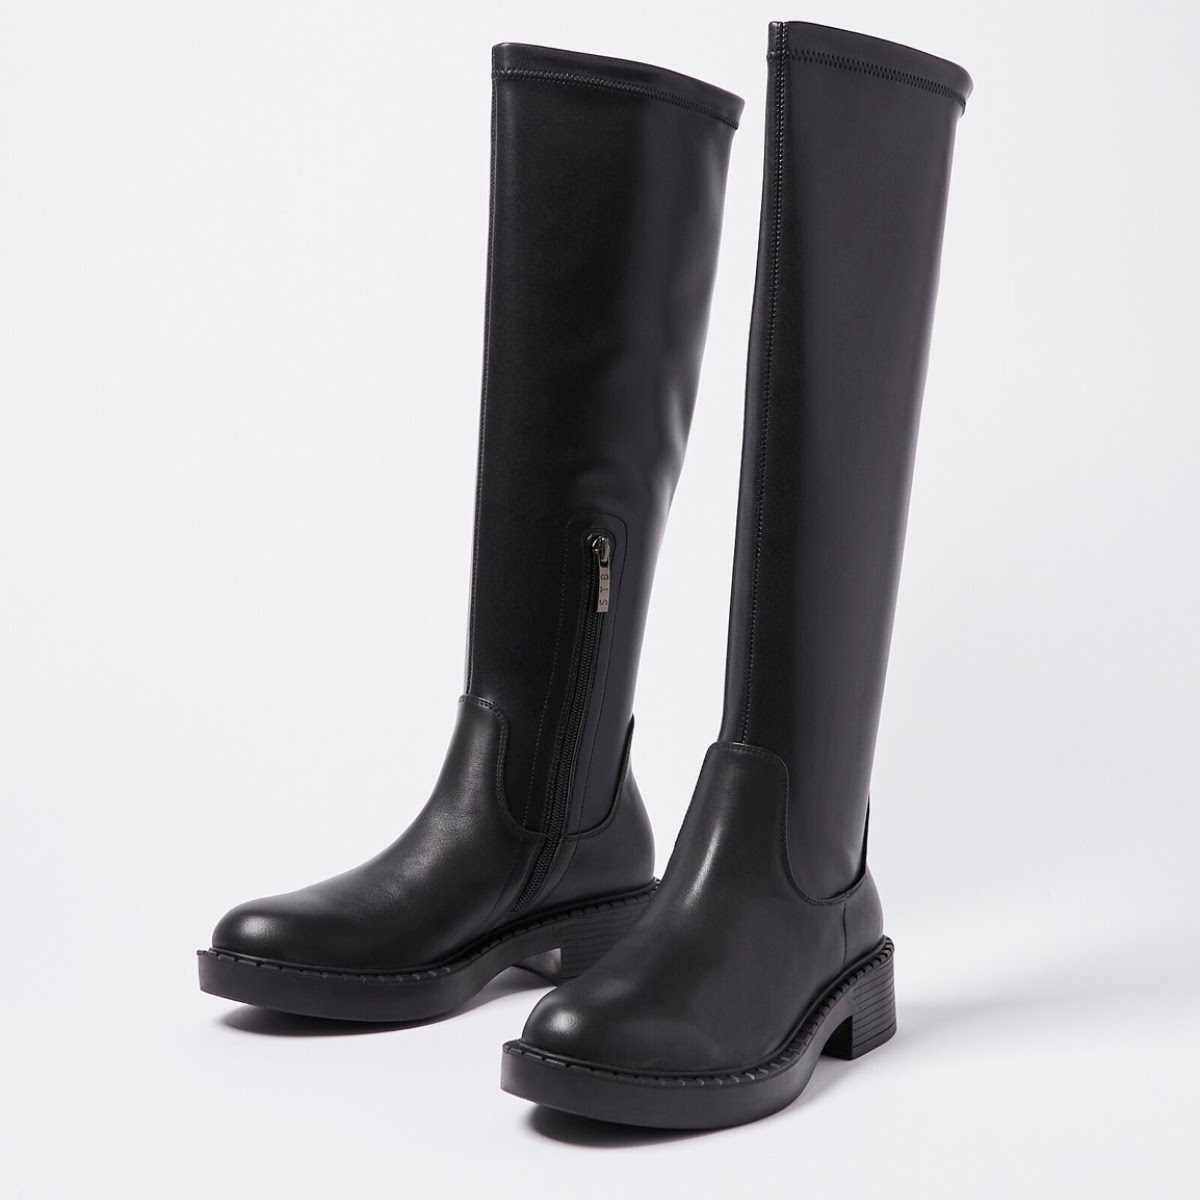 Shoe The Bear Patti Stretch Black Leather Knee High Boots, €120